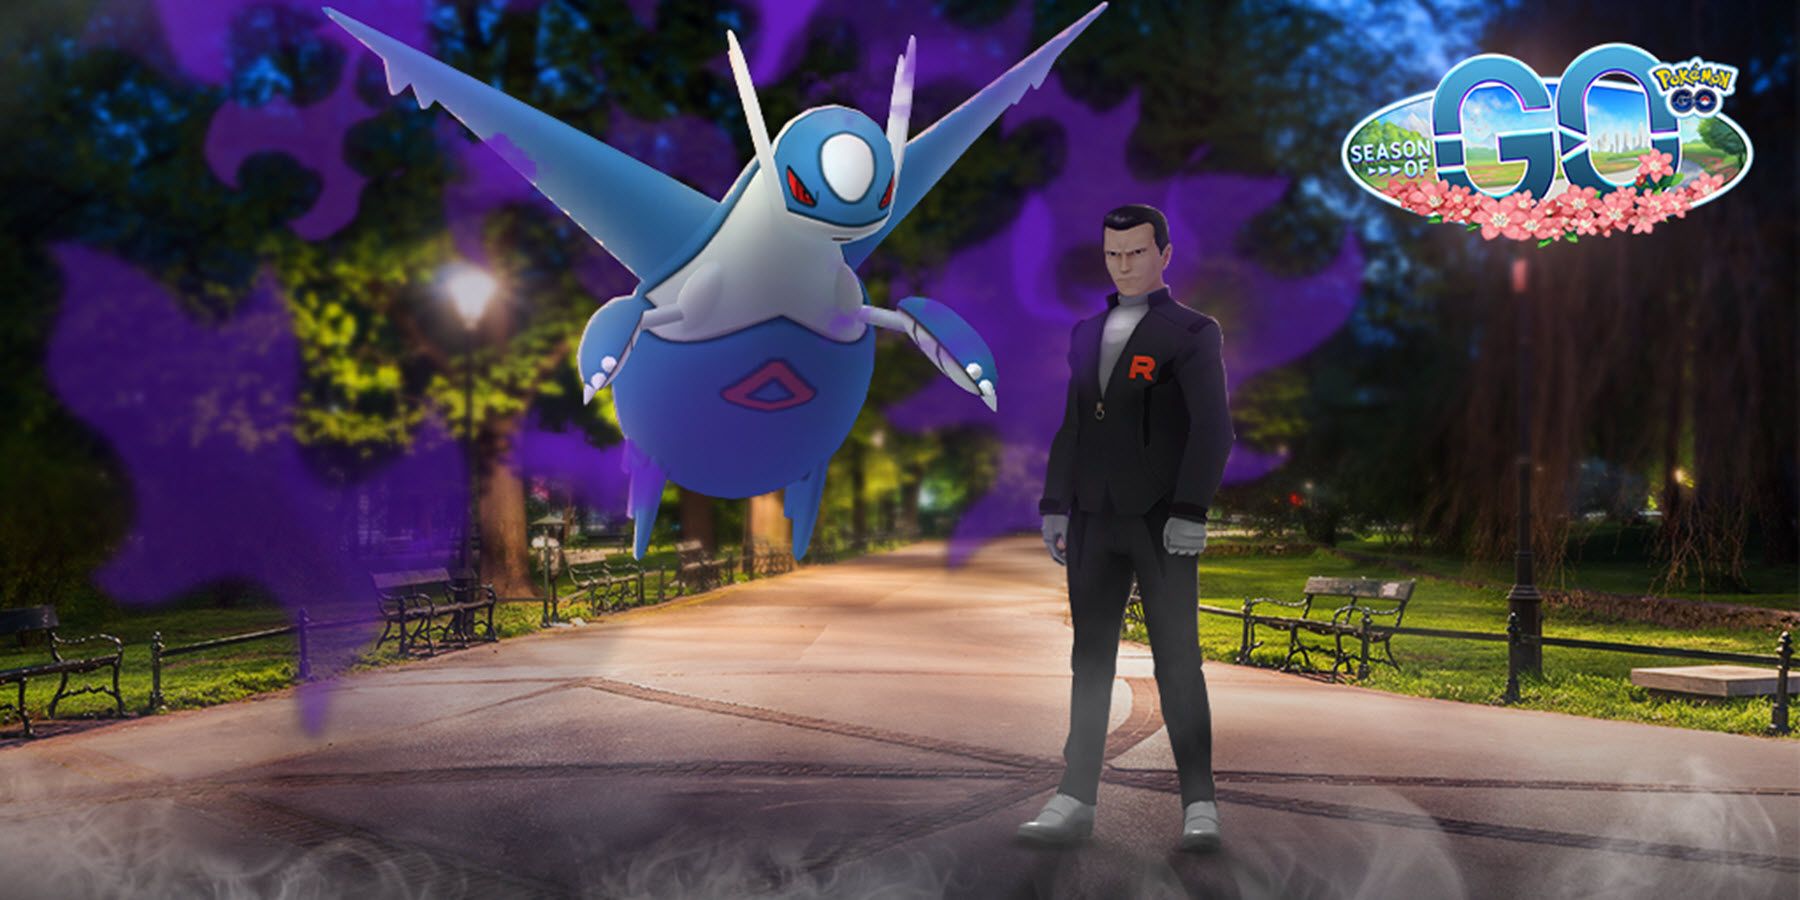 Defeating Team GO Rocket's Cliff, Sierra, Arlo, and Giovanni in Pokémon GO:  October 2023